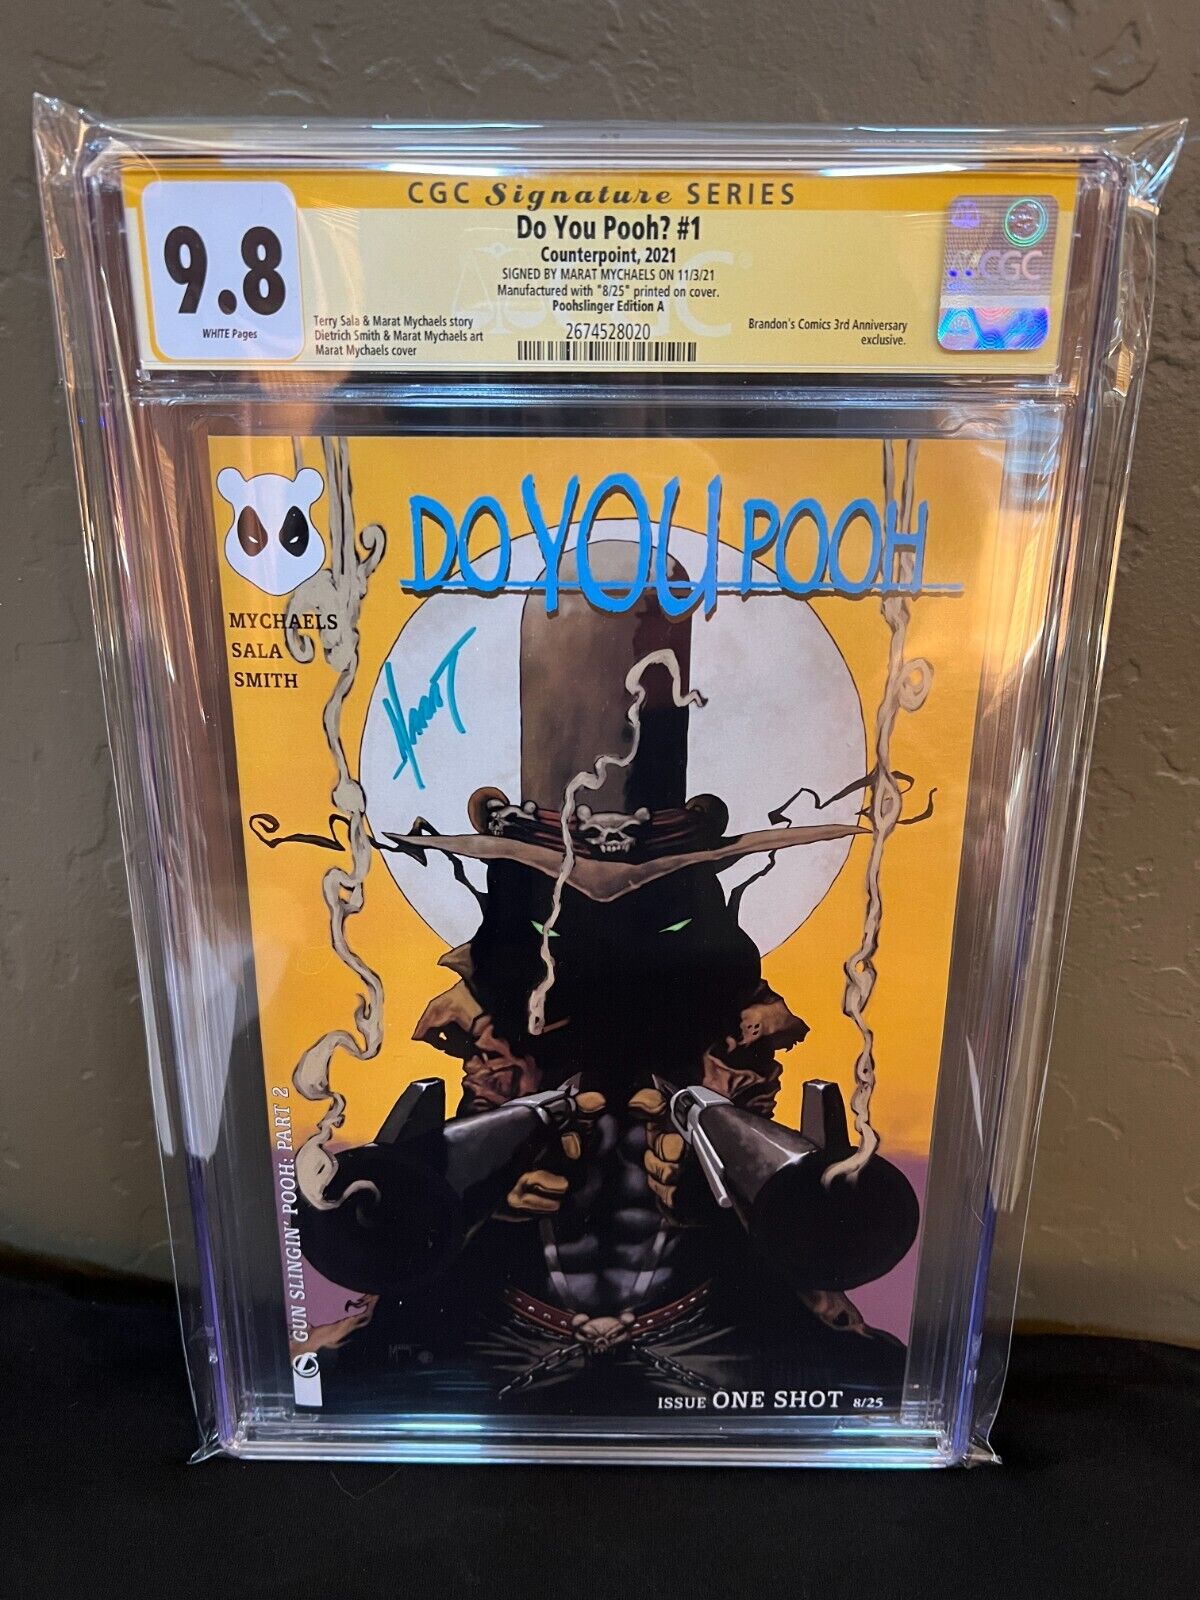 Do You Pooh? #1 Signed CGC 9.8 Gunslinger Spawn #175 cover homage Limited 8 / 25